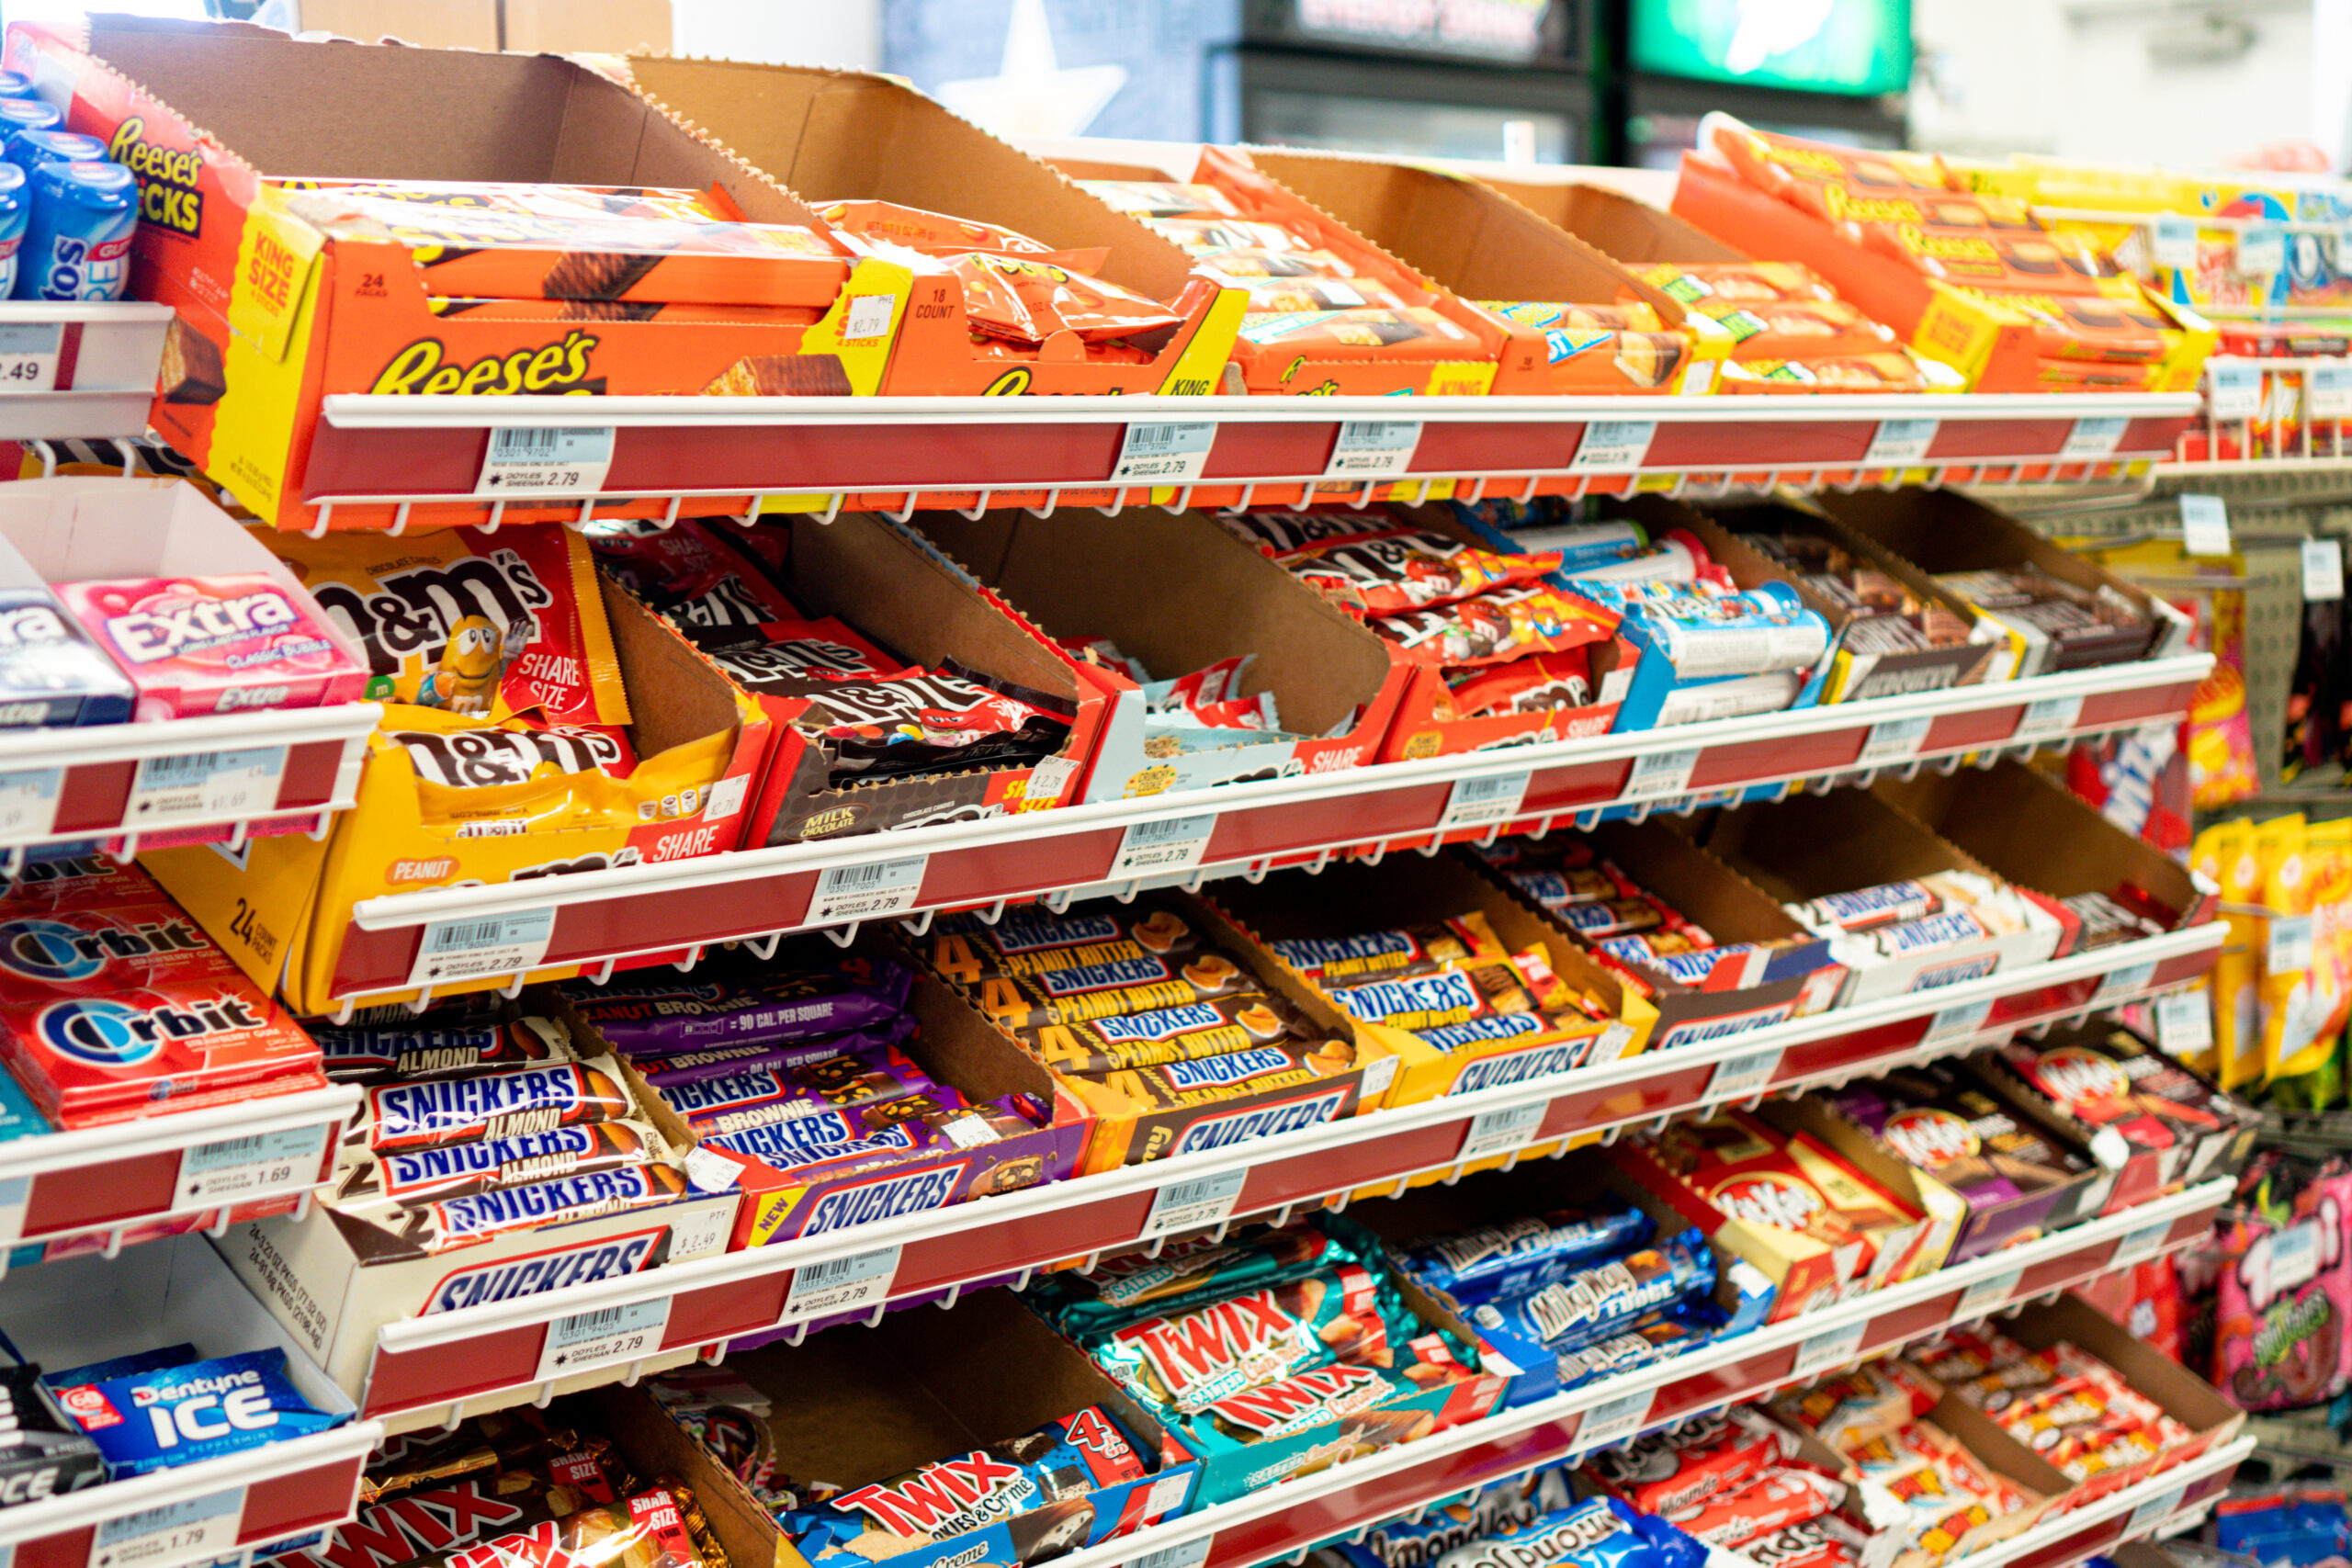 Reese's, M&M's, Snickers, Kit Kat's, and other candies for sale at Four Star Supply owned convenience stores